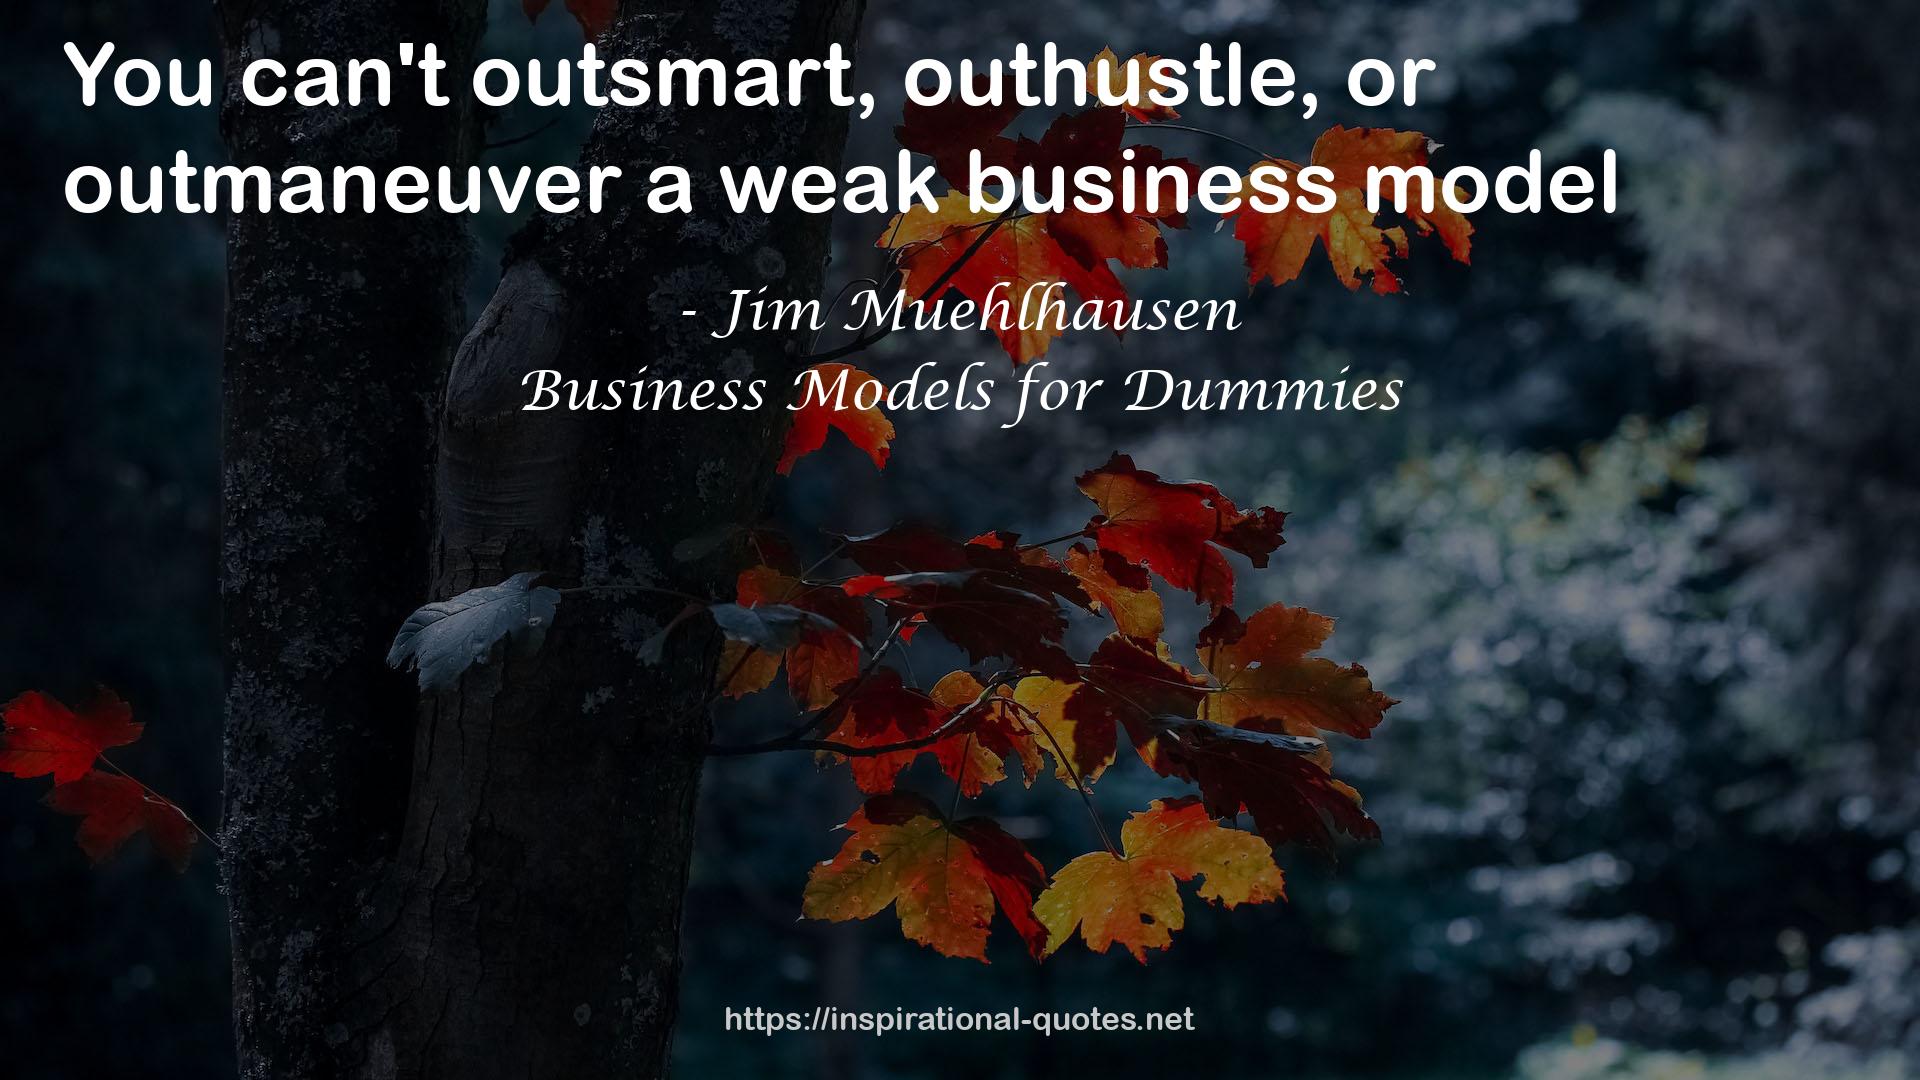 Business Models for Dummies QUOTES